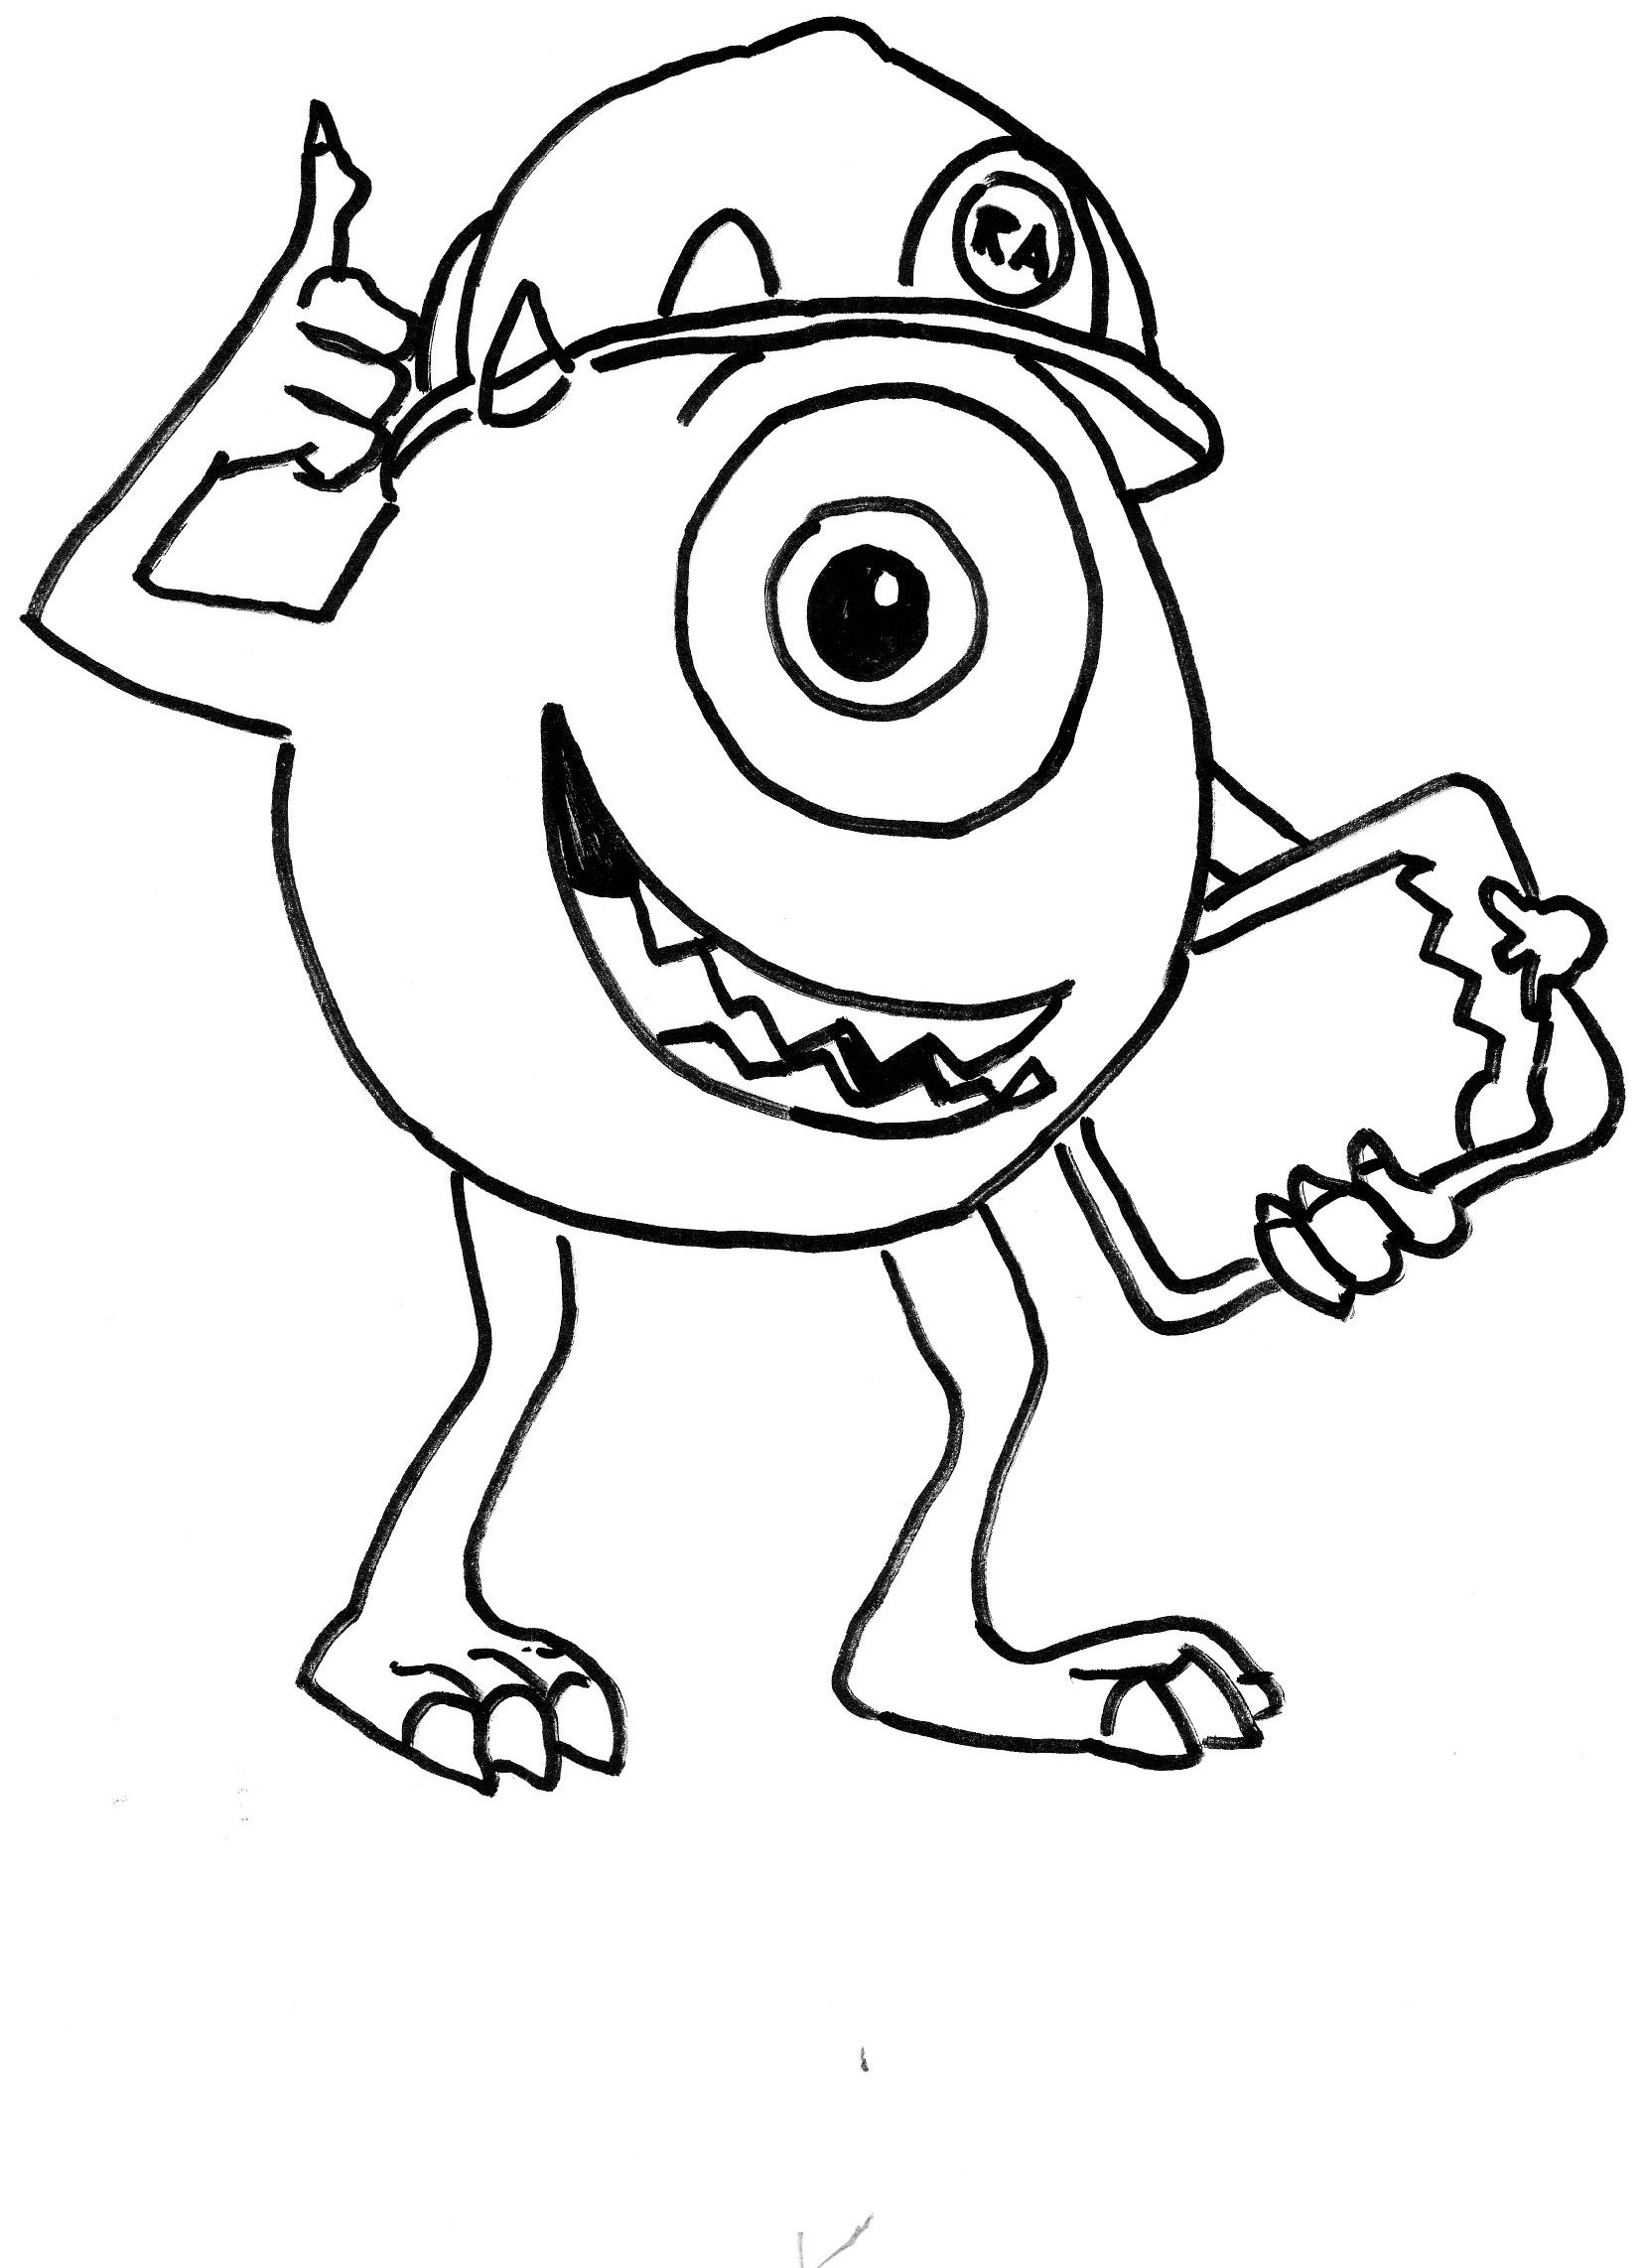 Coloring Pages For Boys To Print
 Coloring Pages for Boys 2018 Dr Odd